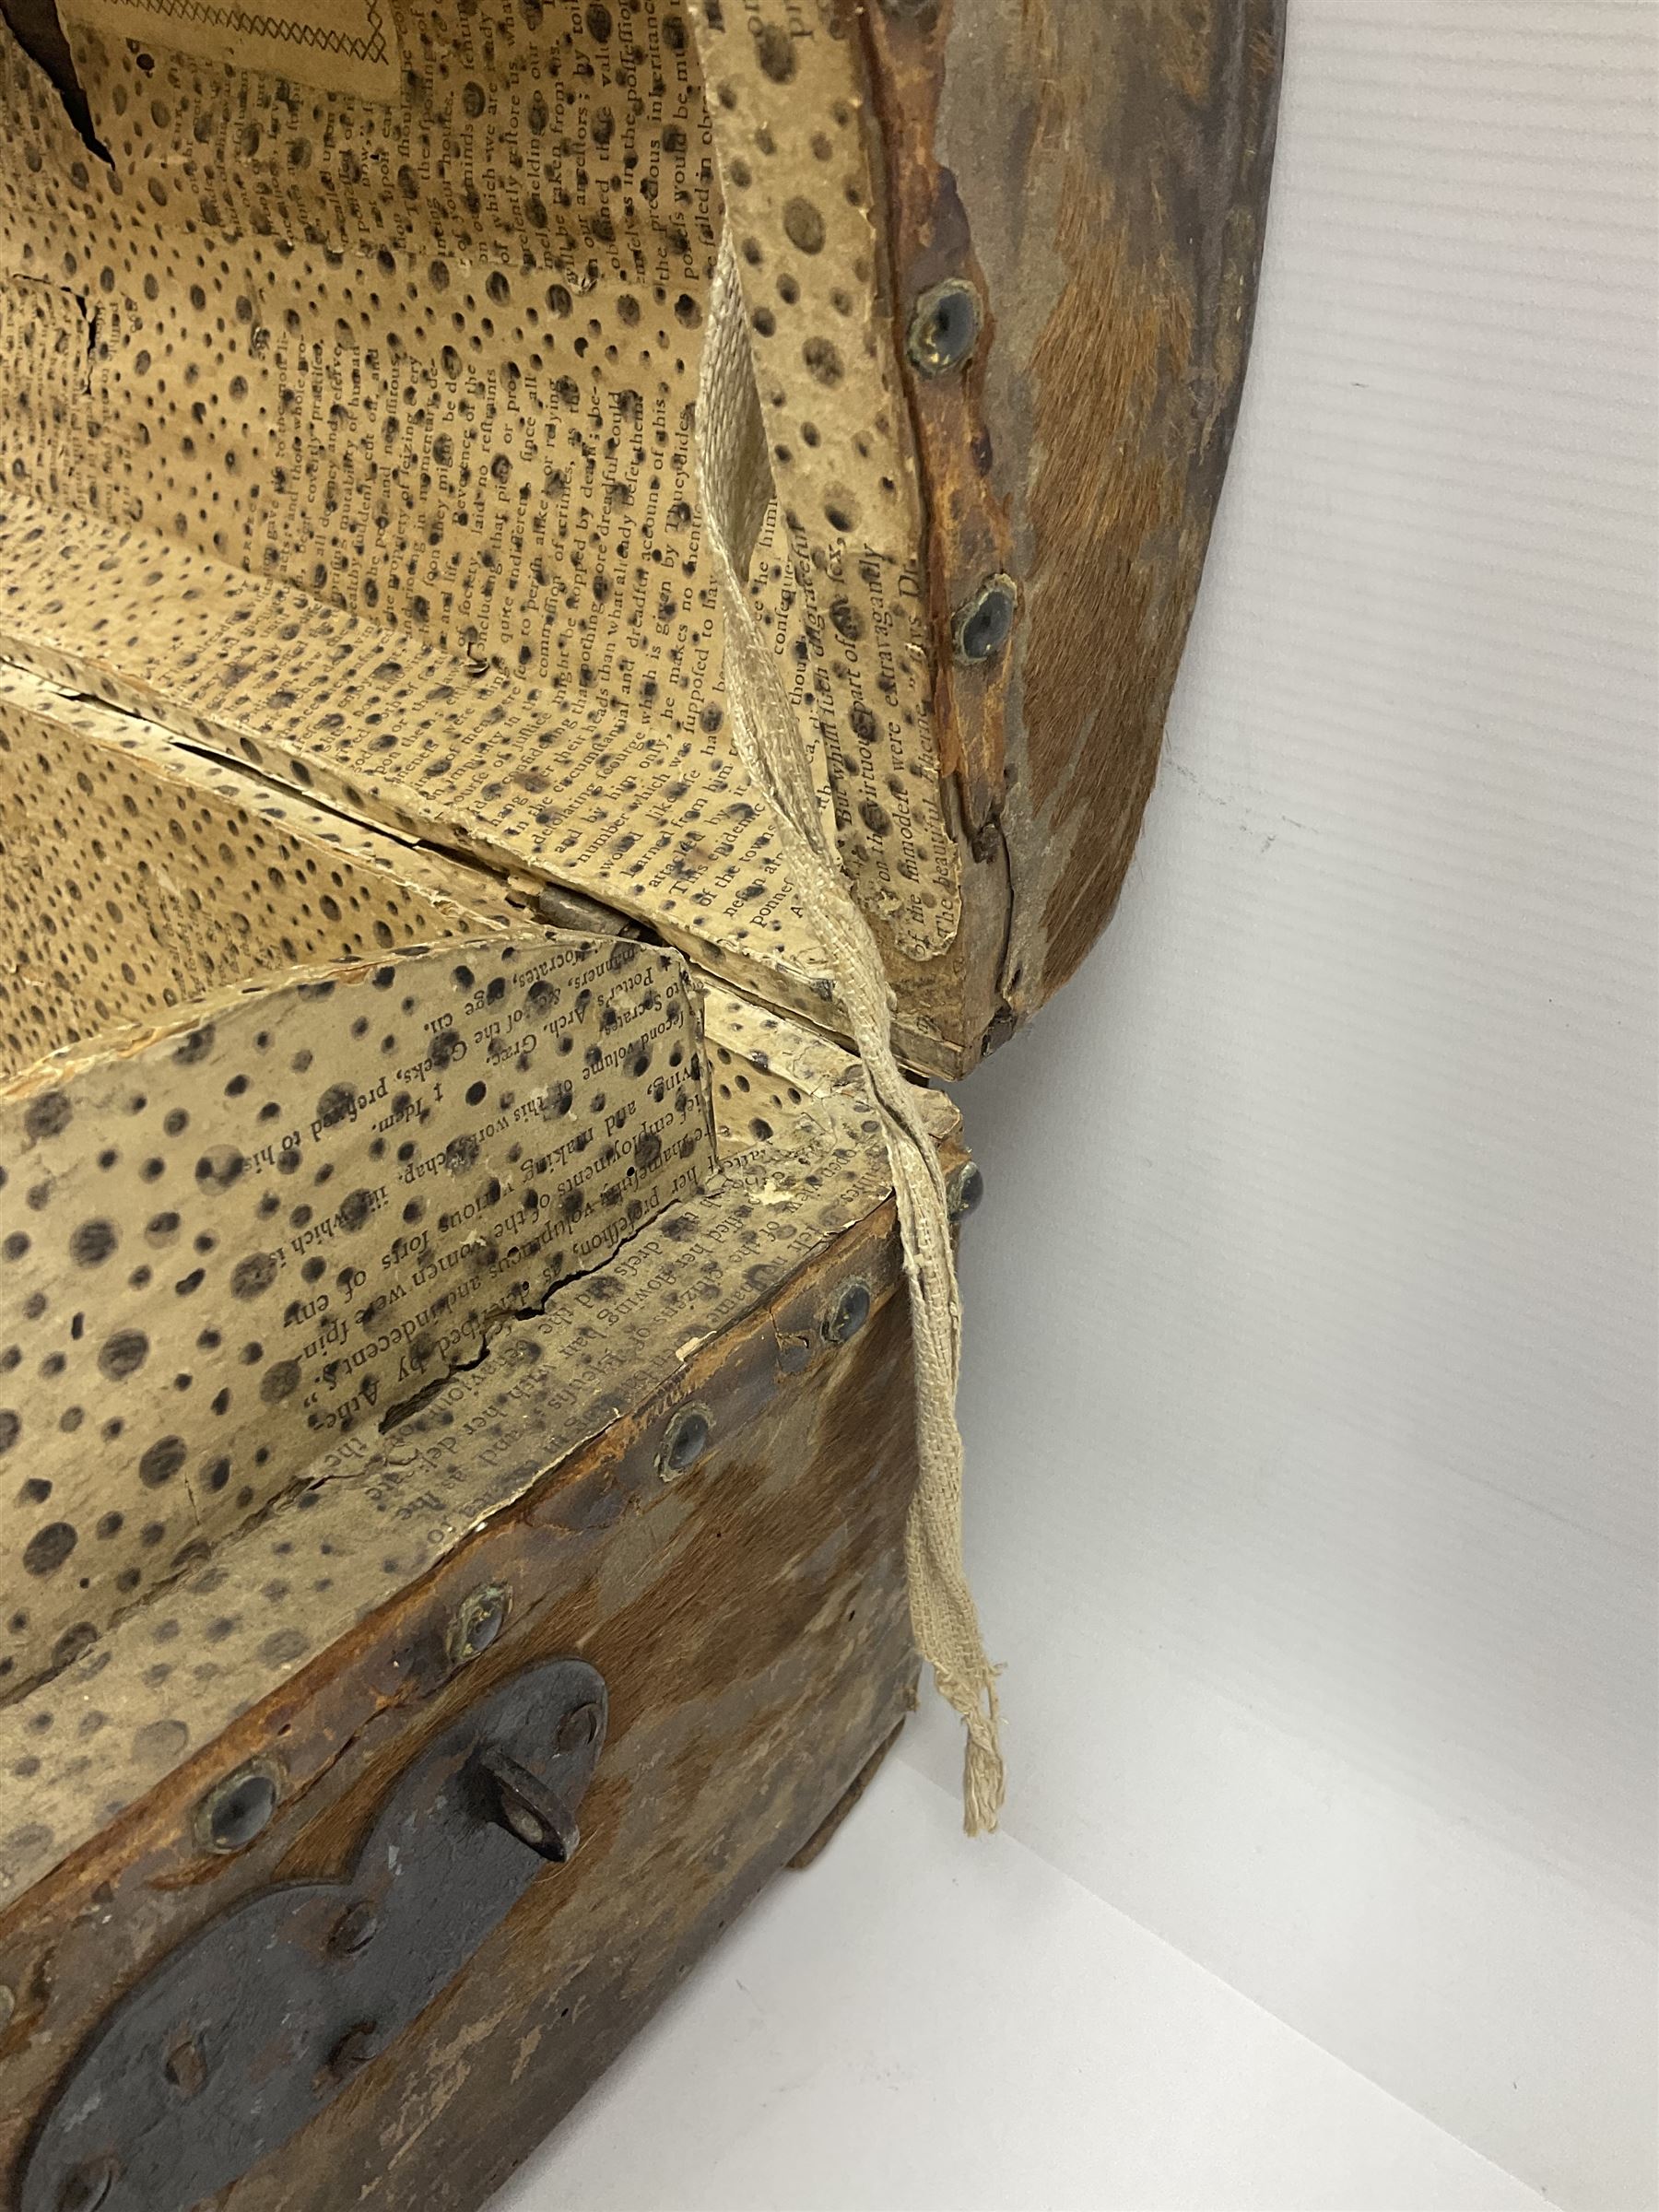 19th century pony skin dome top trunk with metal studded detail - Image 12 of 13